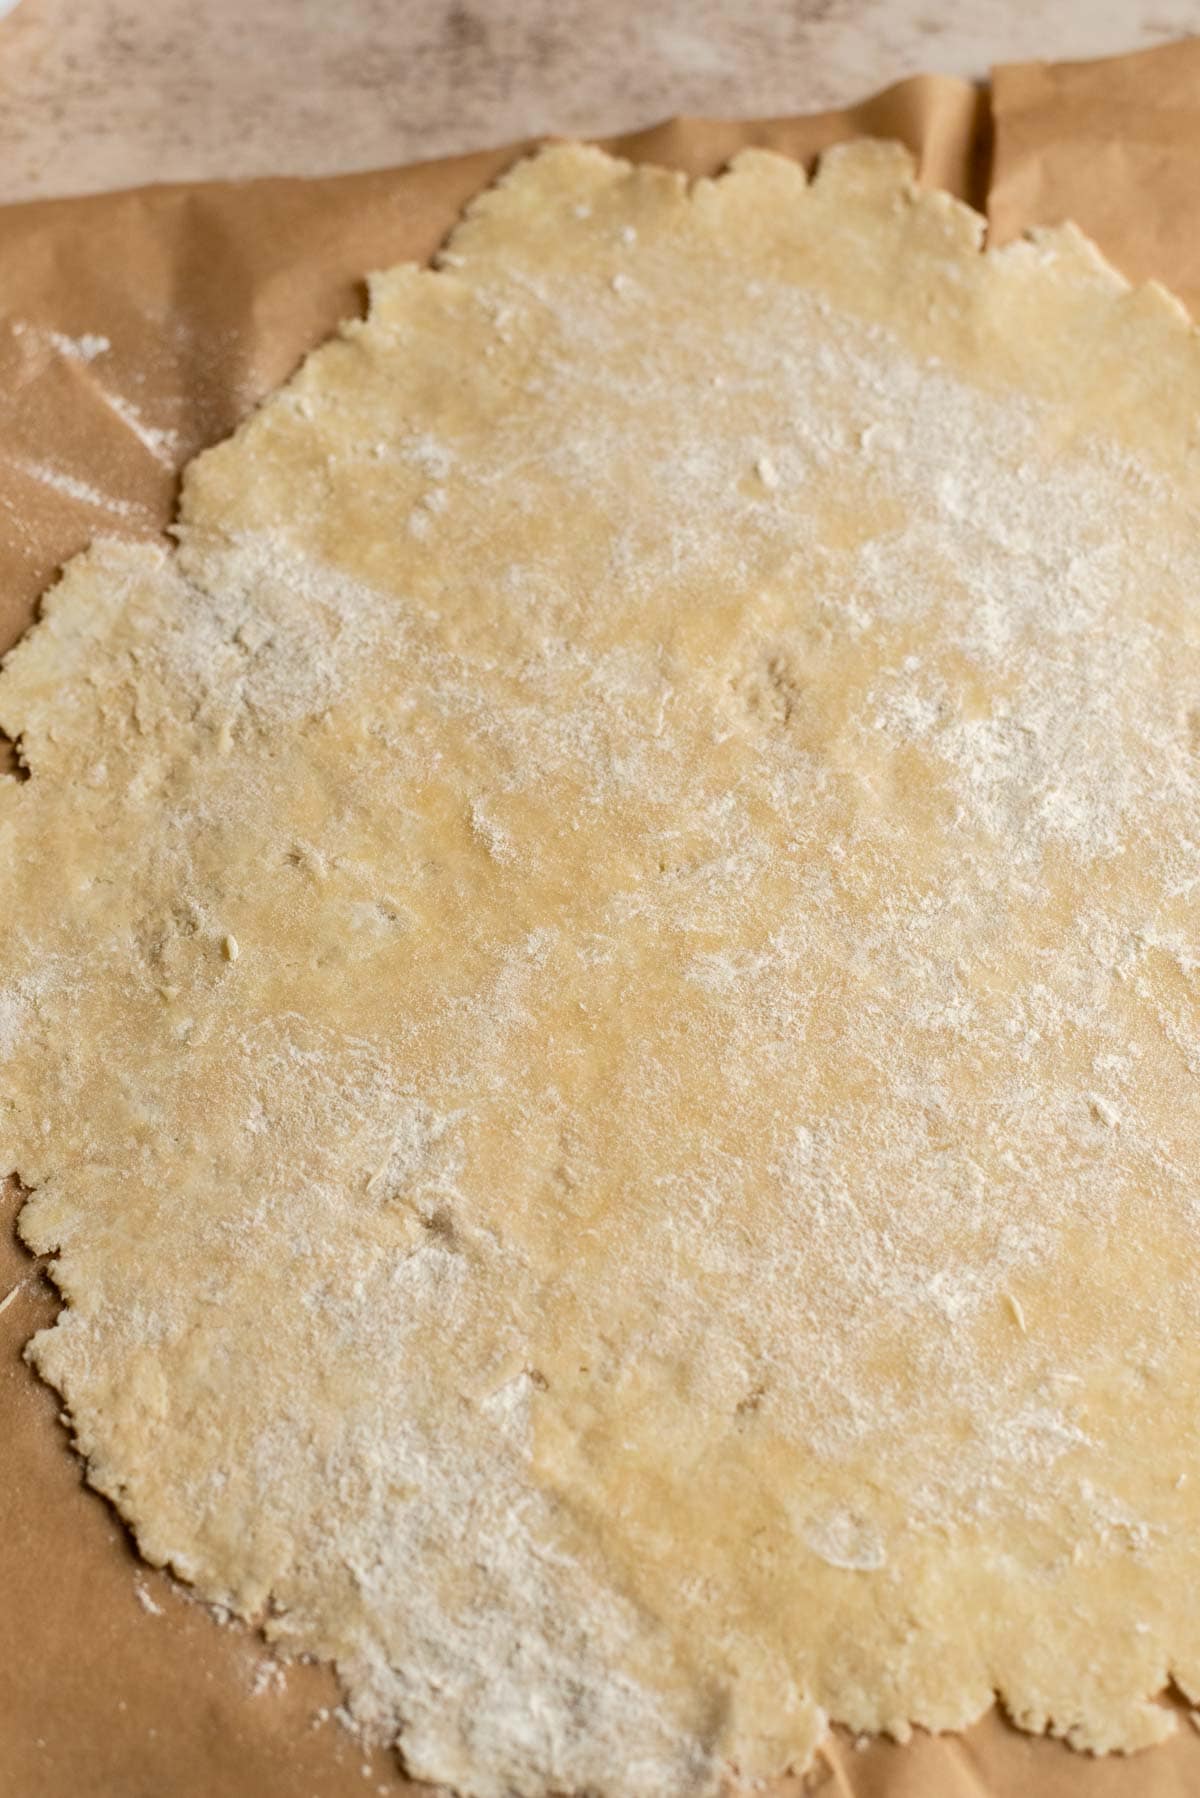 Rolled out dough on parchment paper.